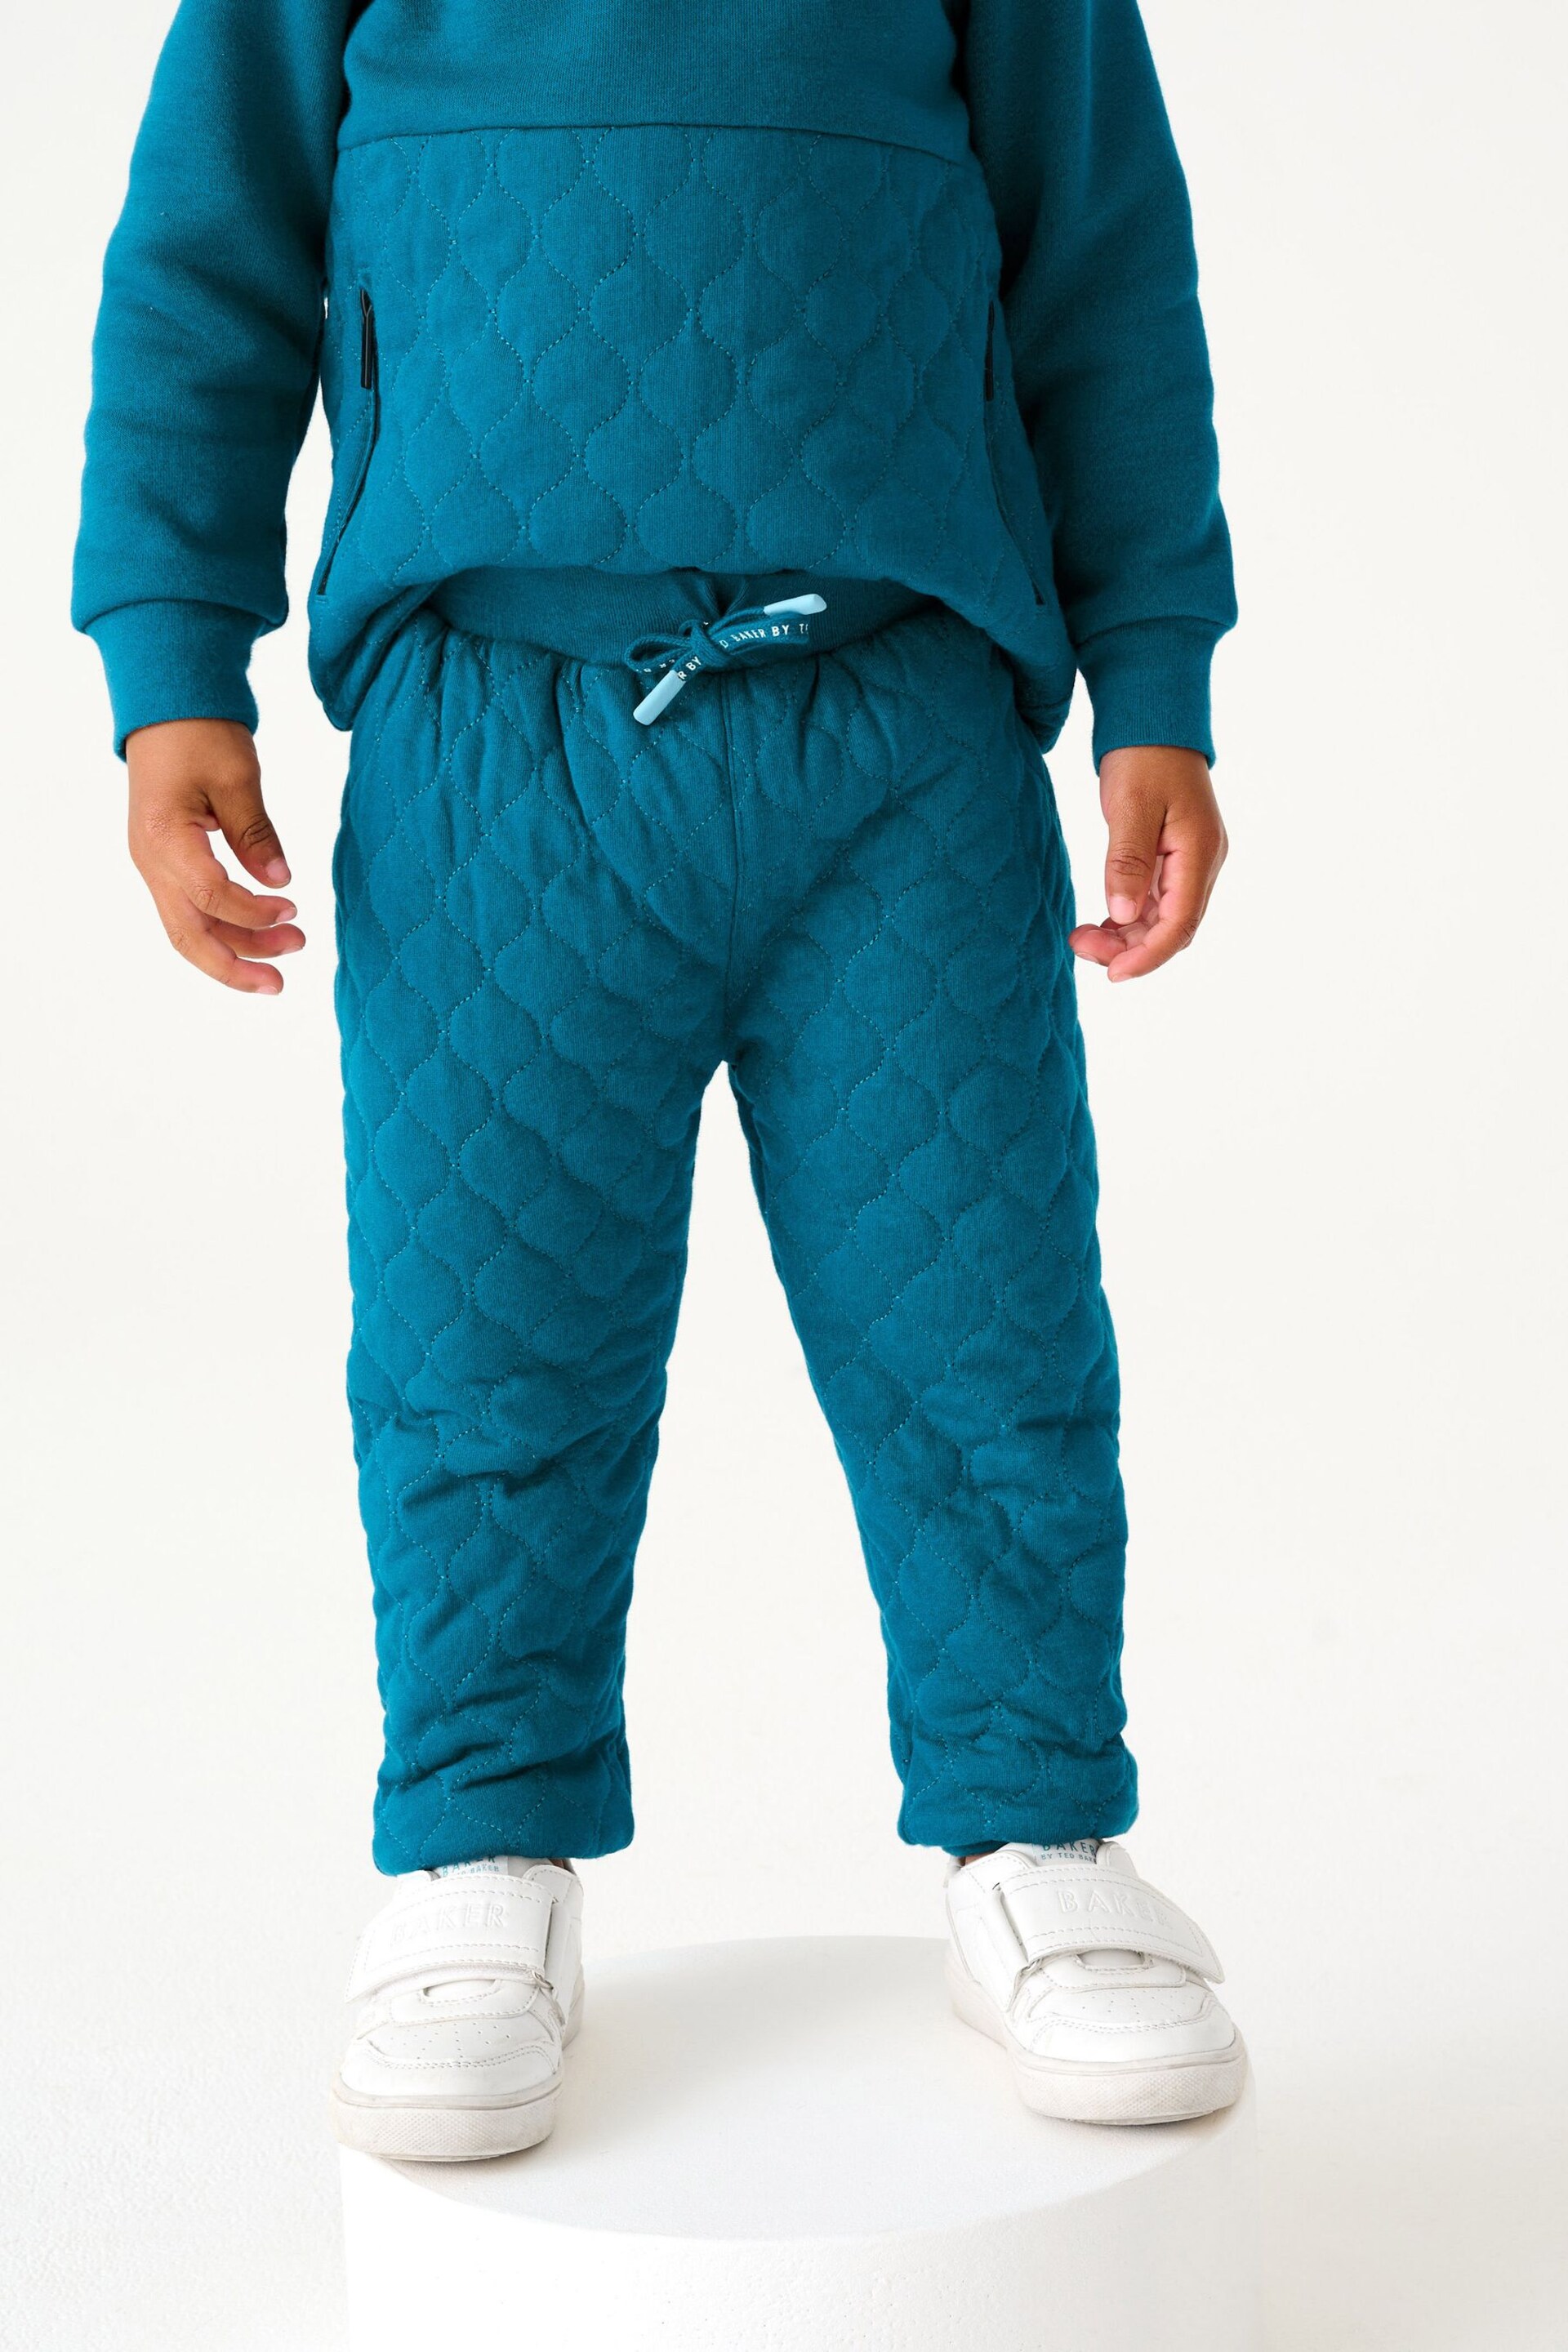 Baker by Ted Baker (0-6yrs) Quilted Sweater and Jogger Set - Image 7 of 13